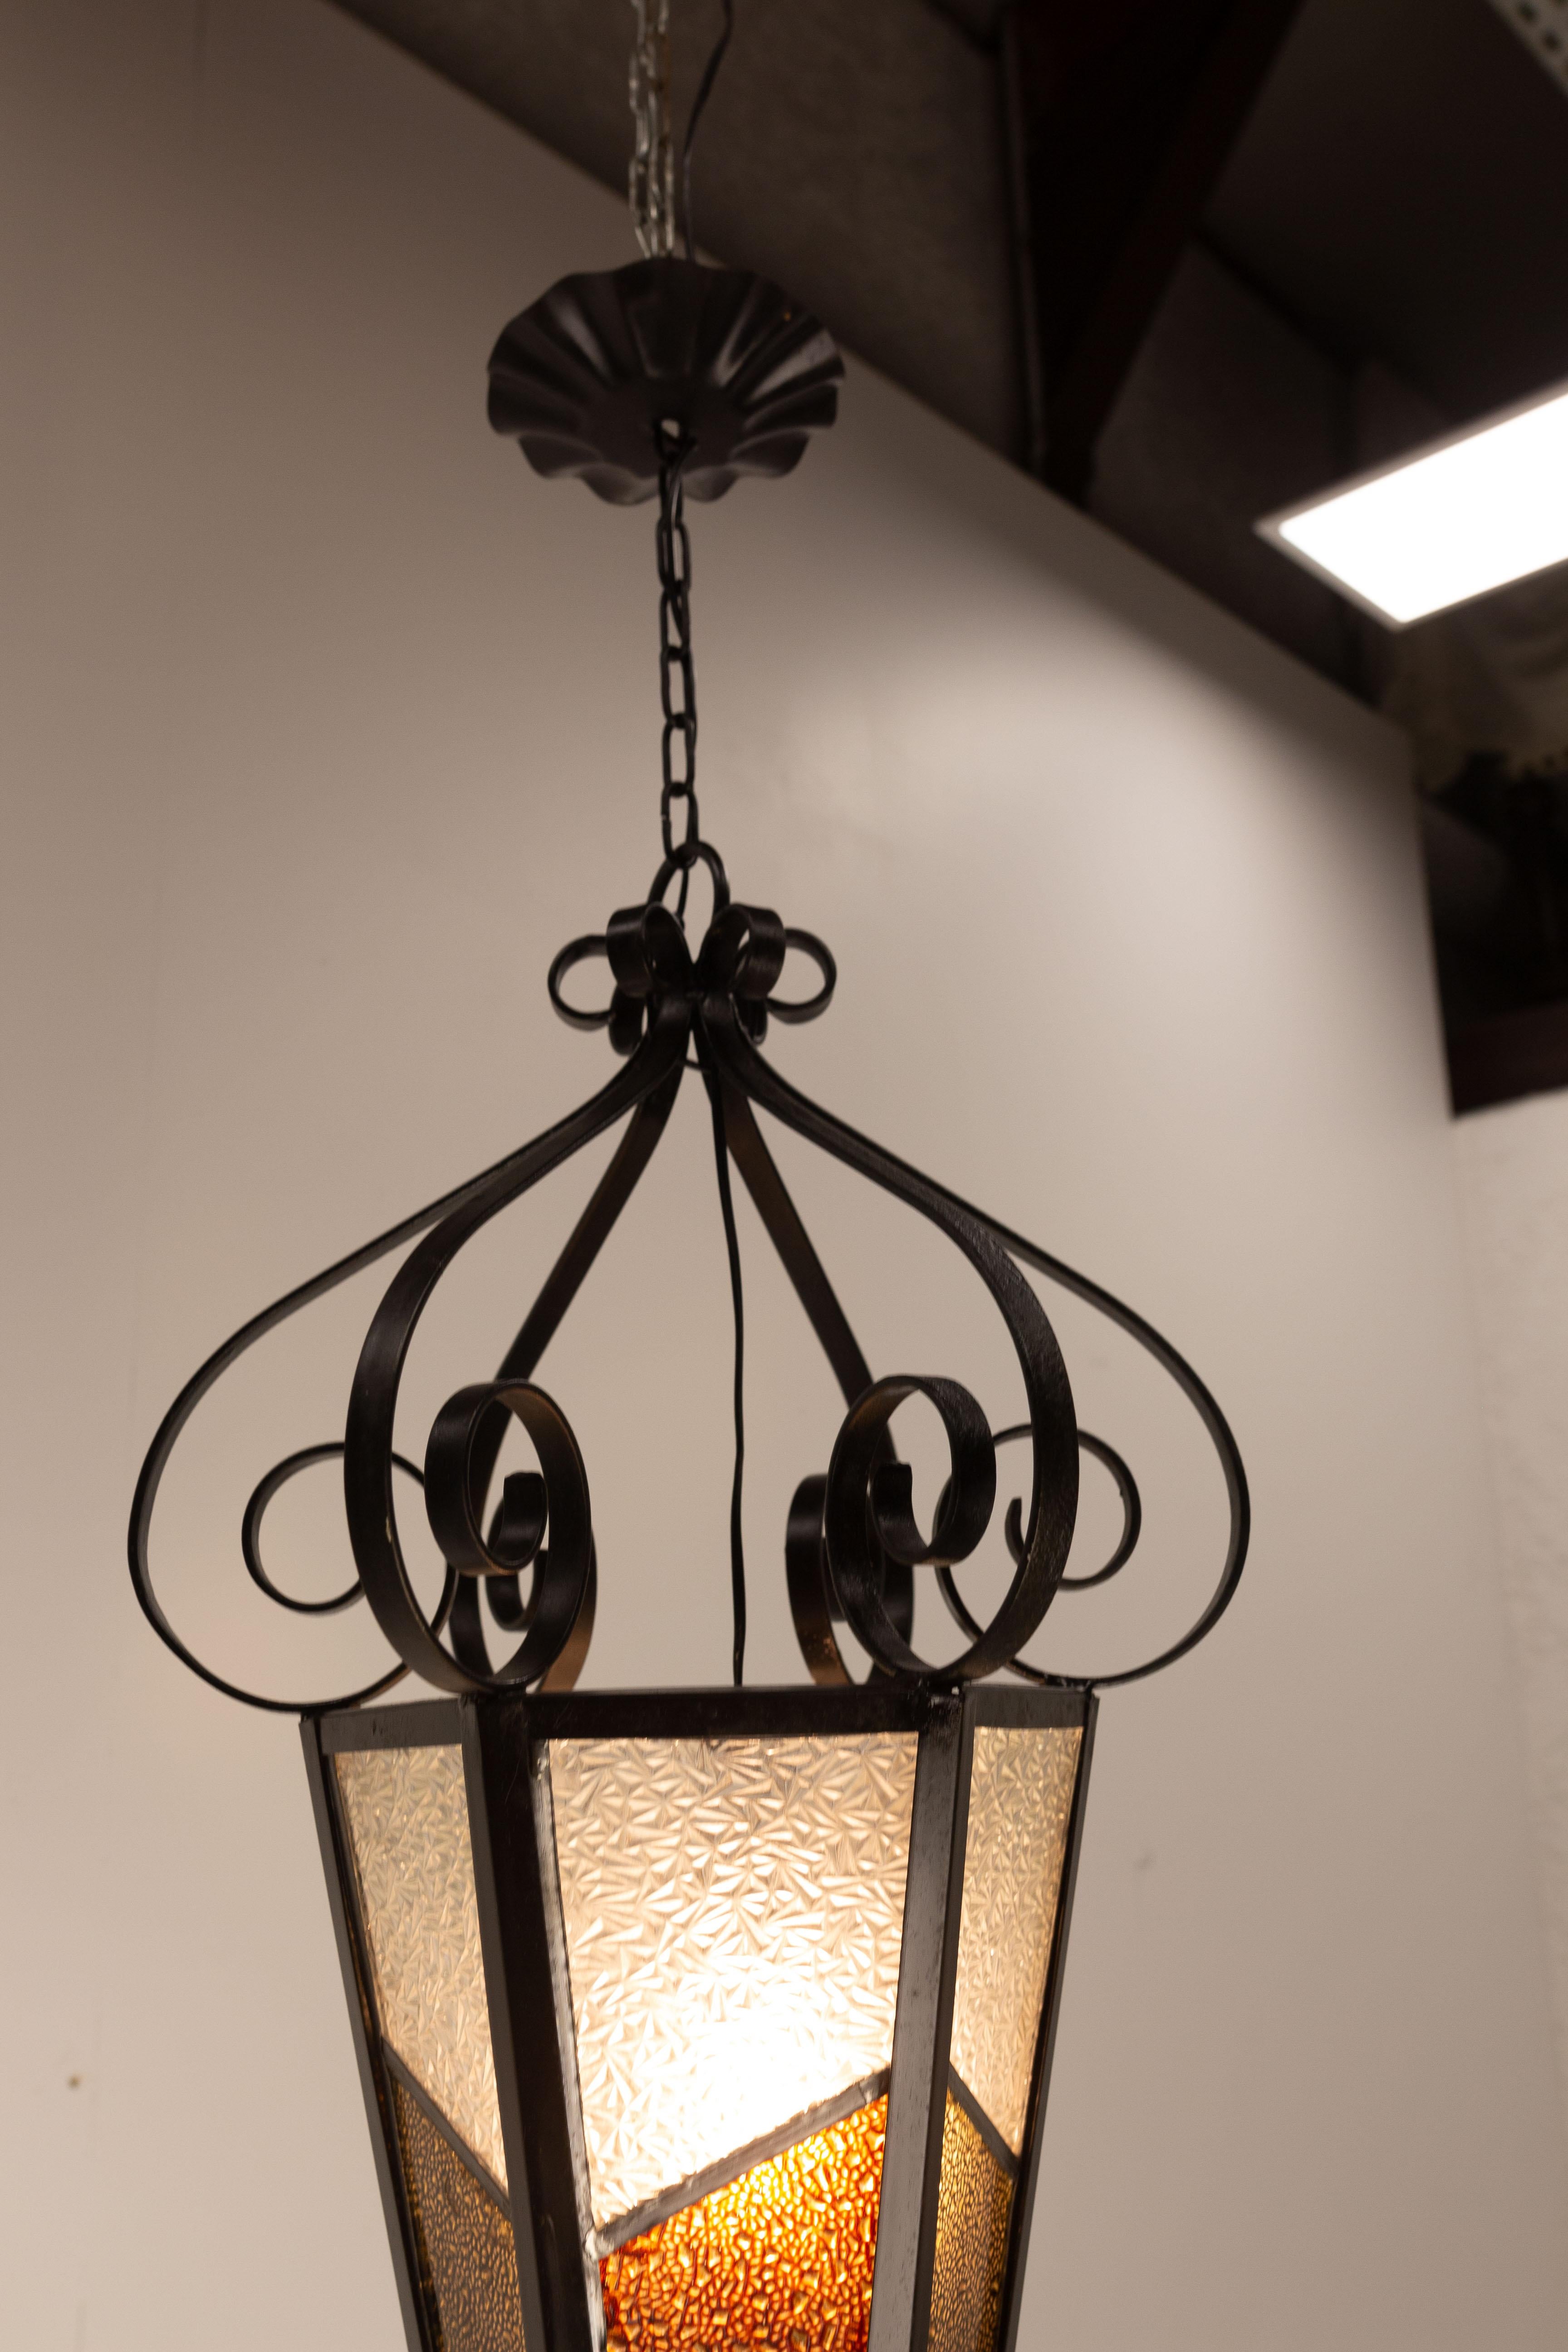 Iron Textured & Colored Glass Ceiling Lamp Lustre French Lantern, circa 1960 For Sale 3